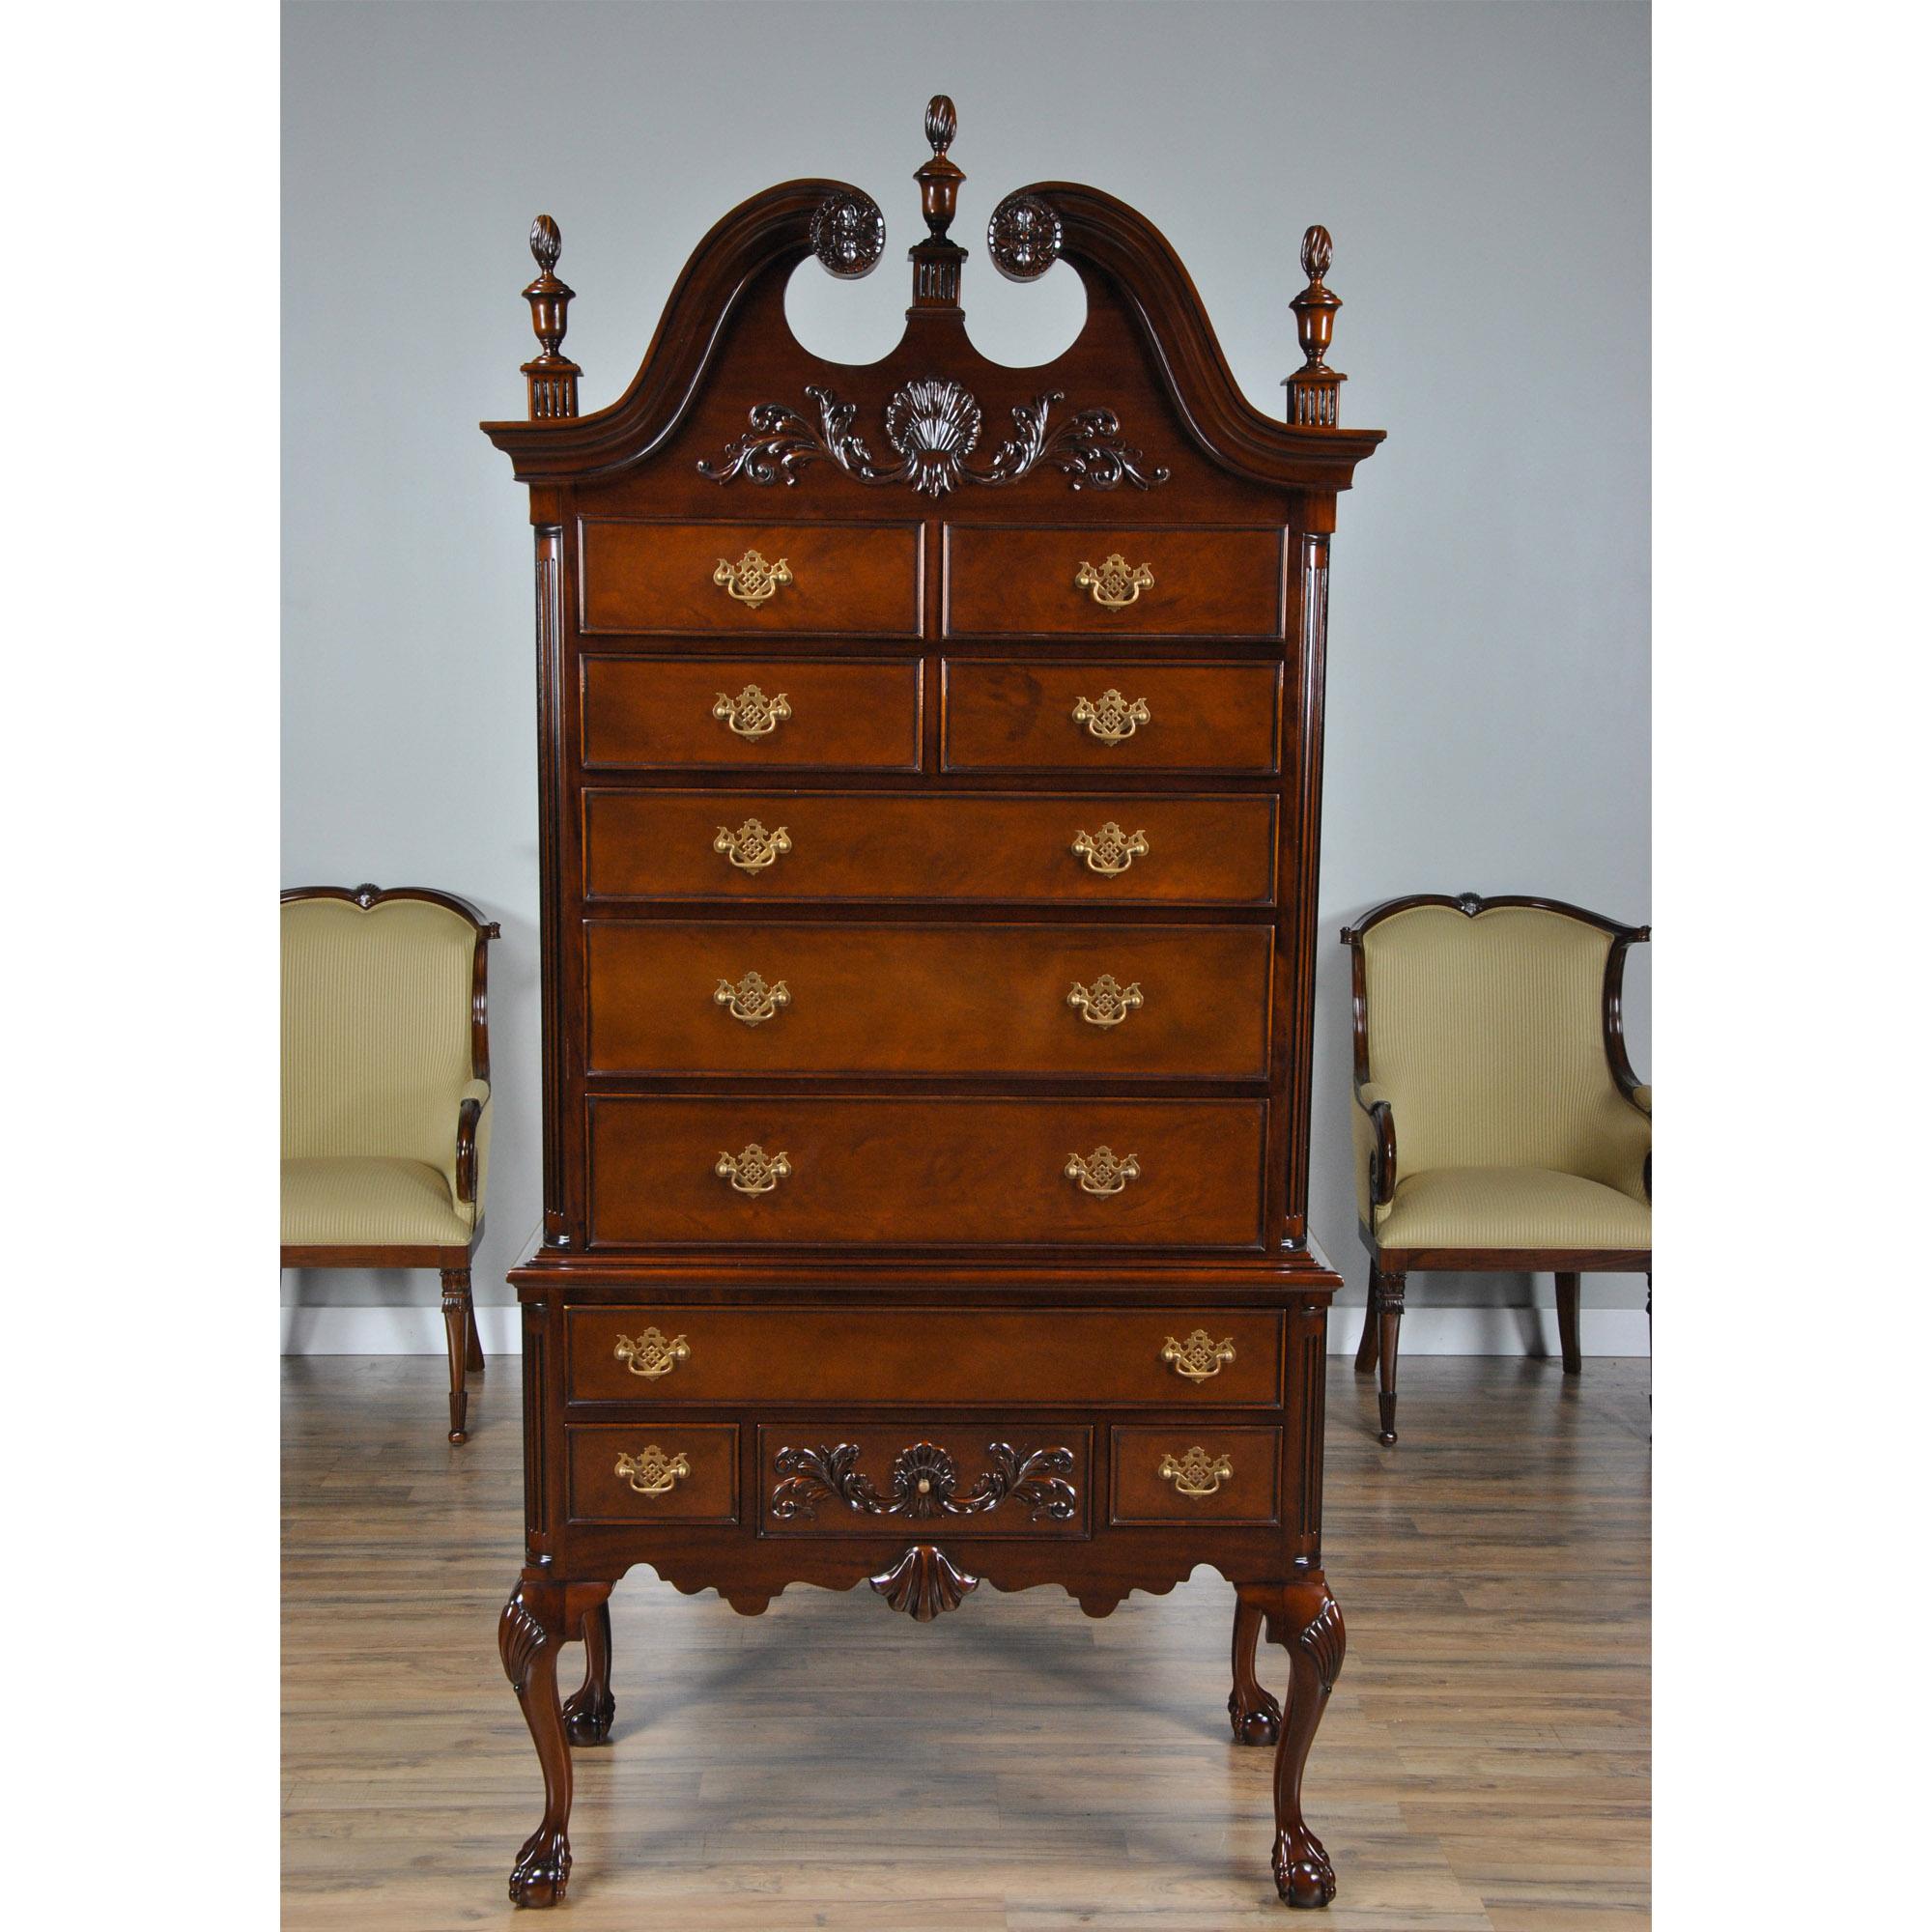 Inspired by some of the greatest cabinet makers of all time this Chippendale Mahogany High Chest resembles those produced in the Philadelphia region in the 18th Century. High quality hand carved details and finely selected mahogany solids and